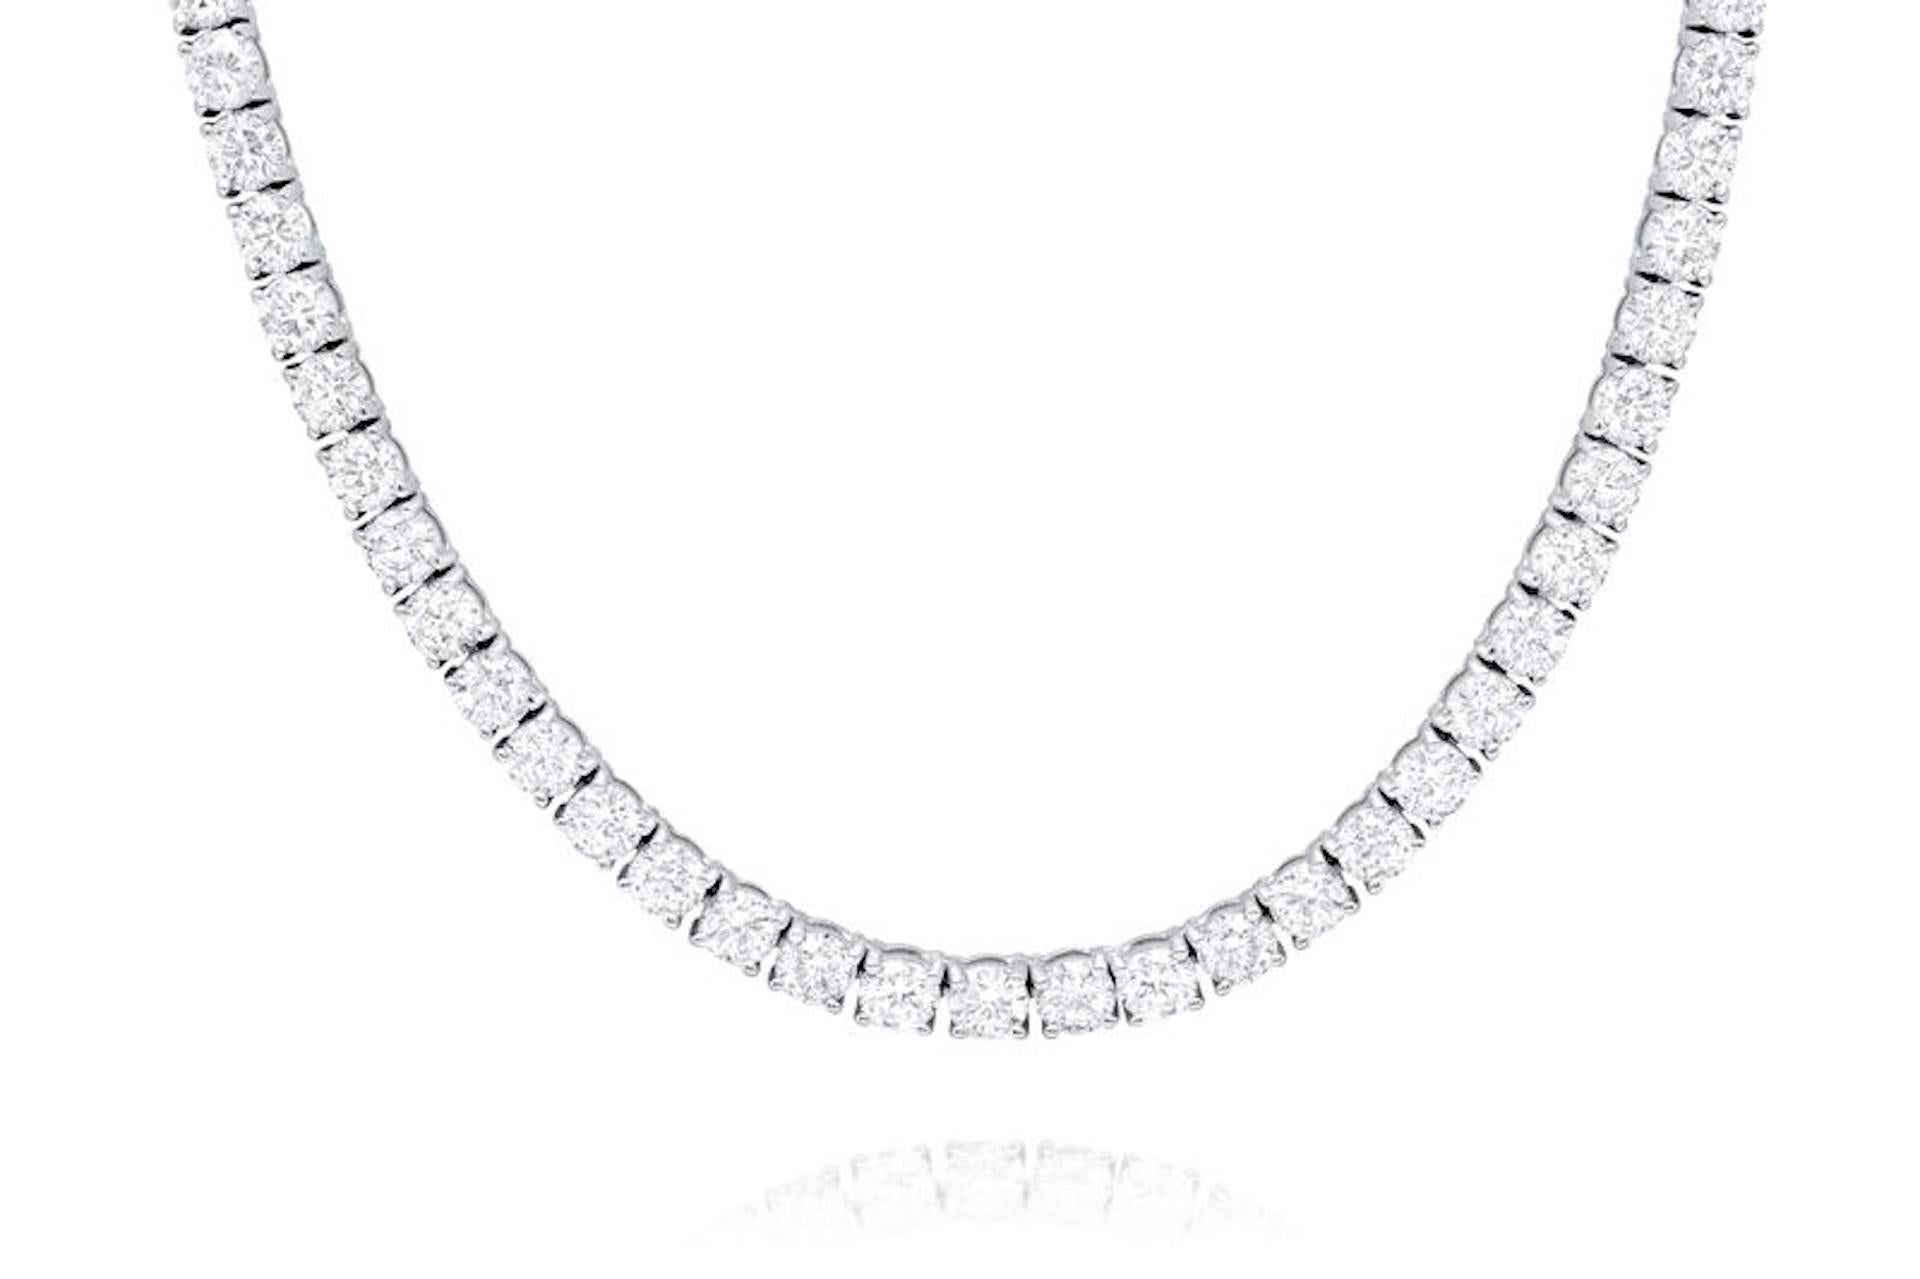 Modern Diana M. 11.45 Cts Round Diamond 4 Prong Tennis Necklace 14k White Gold  For Sale